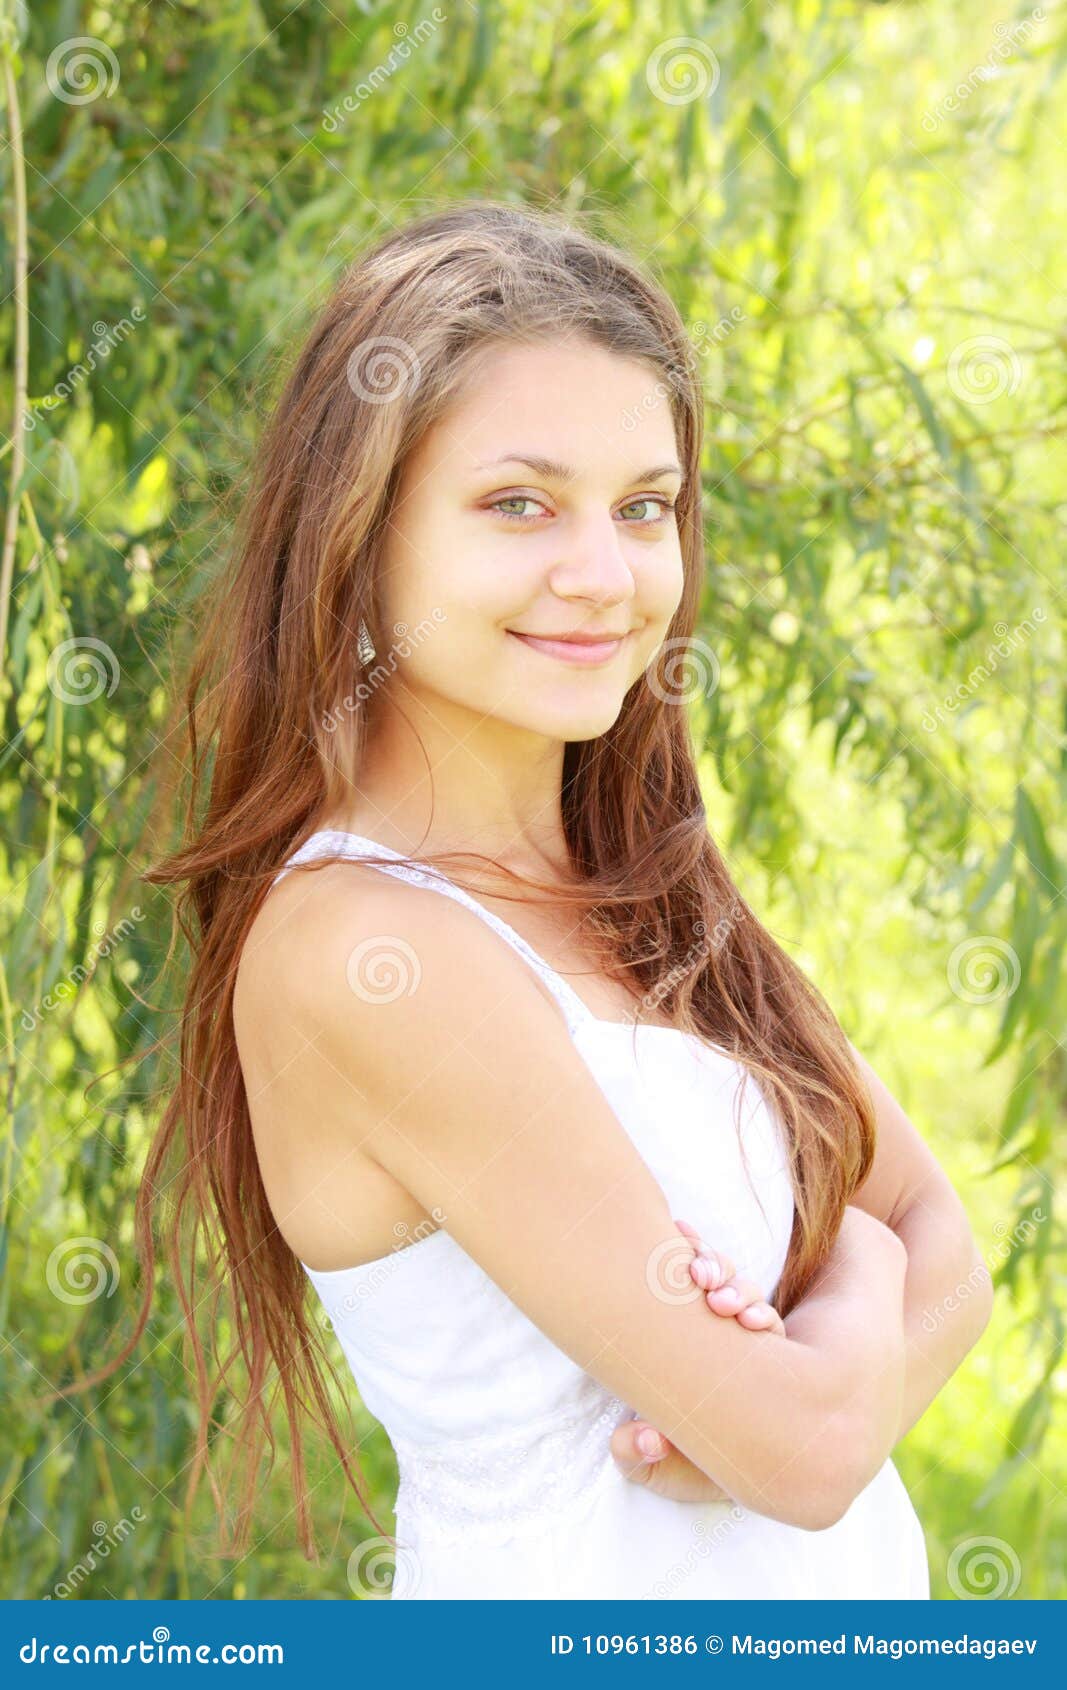 Brunette Holding Arms Folded Stock Photo - Image of green, people: 10961386